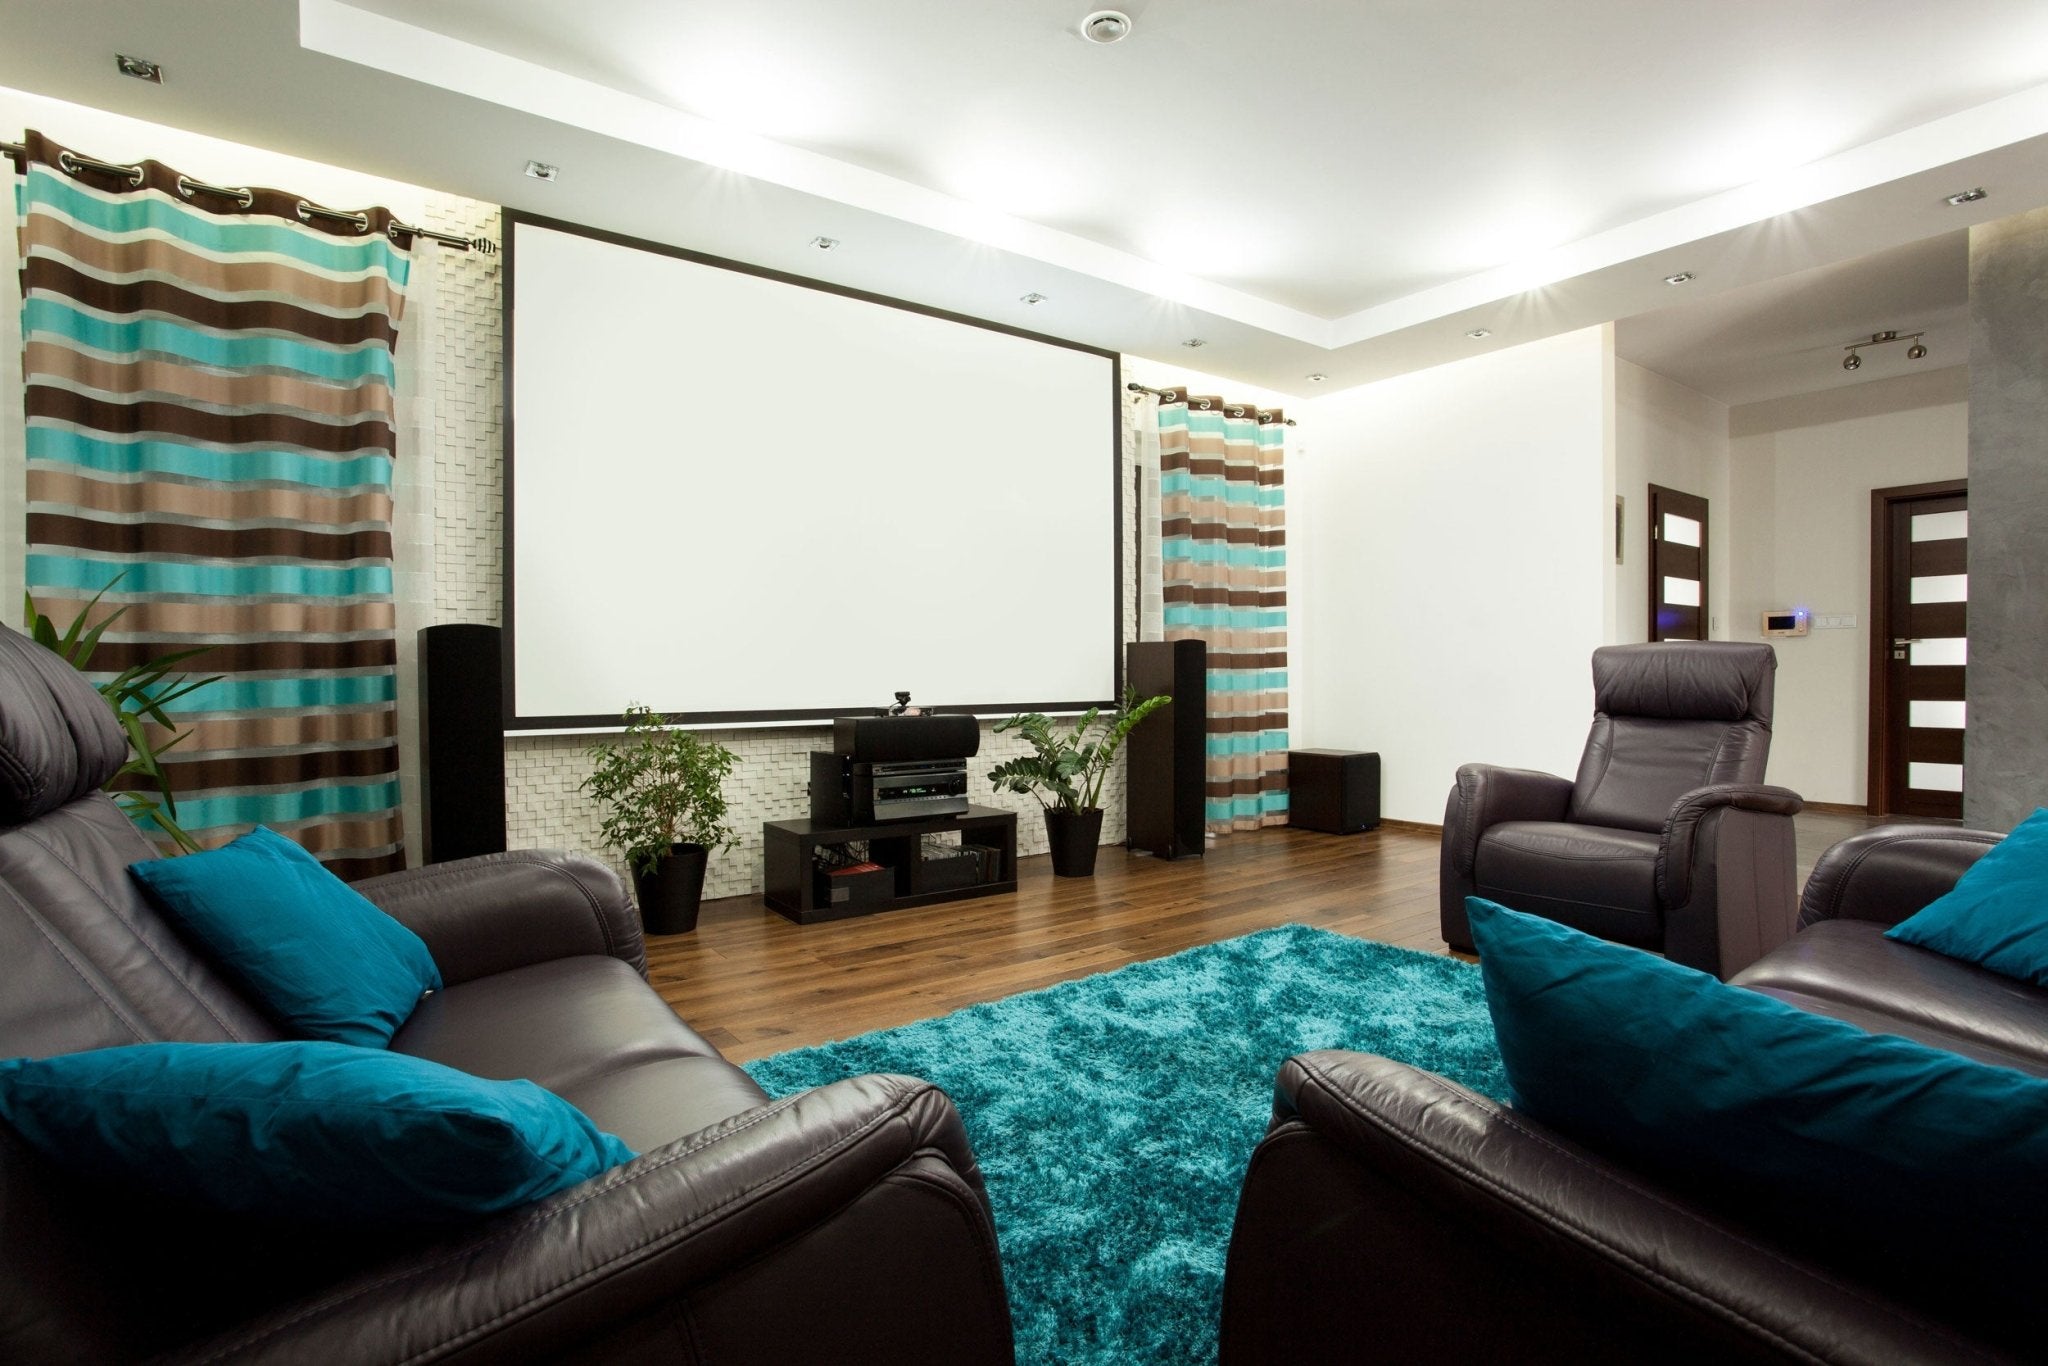 How to Create an In-Home Movie Theater - Mount-It!